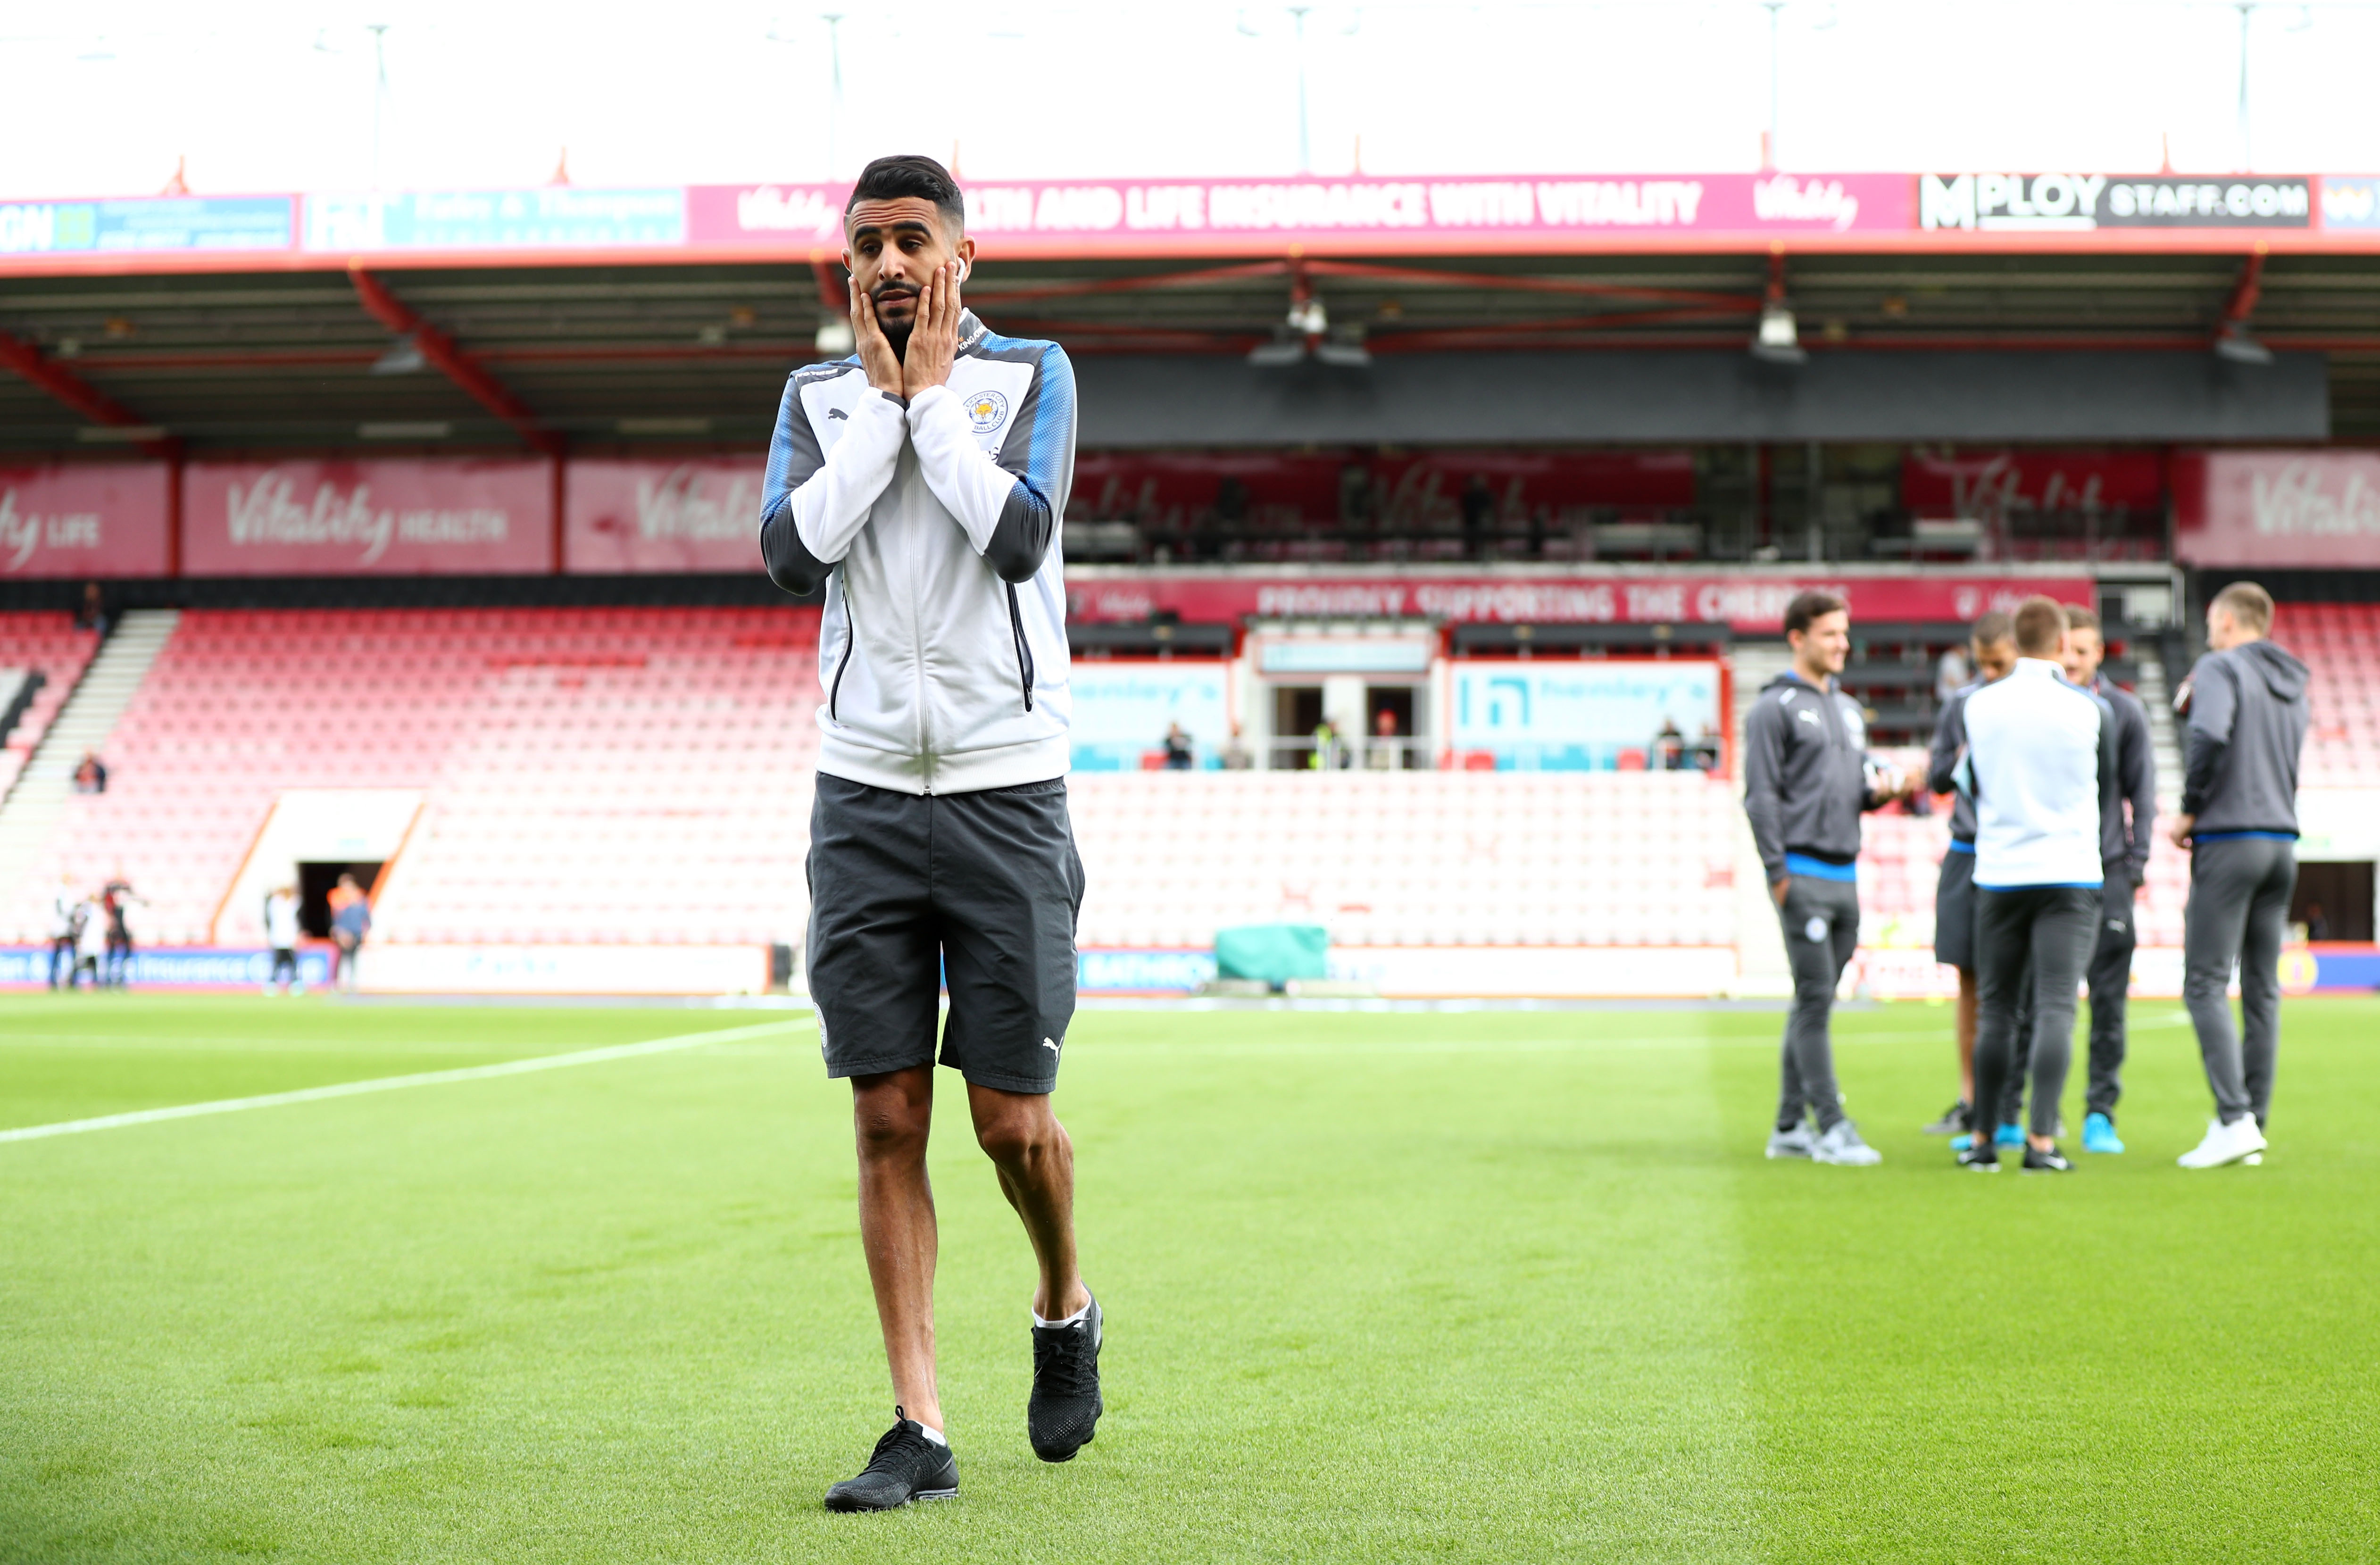 BOURNEMOUTH, ENGLAND - SEPTEMBER 30: Riyad Mahrez of Leicester City takes a look around the pitch prior to the Premier League match between AFC Bournemouth and Leicester City at Vitality Stadium on September 30, 2017 in Bournemouth, England.  (Photo by Michael Steele/Getty Images)